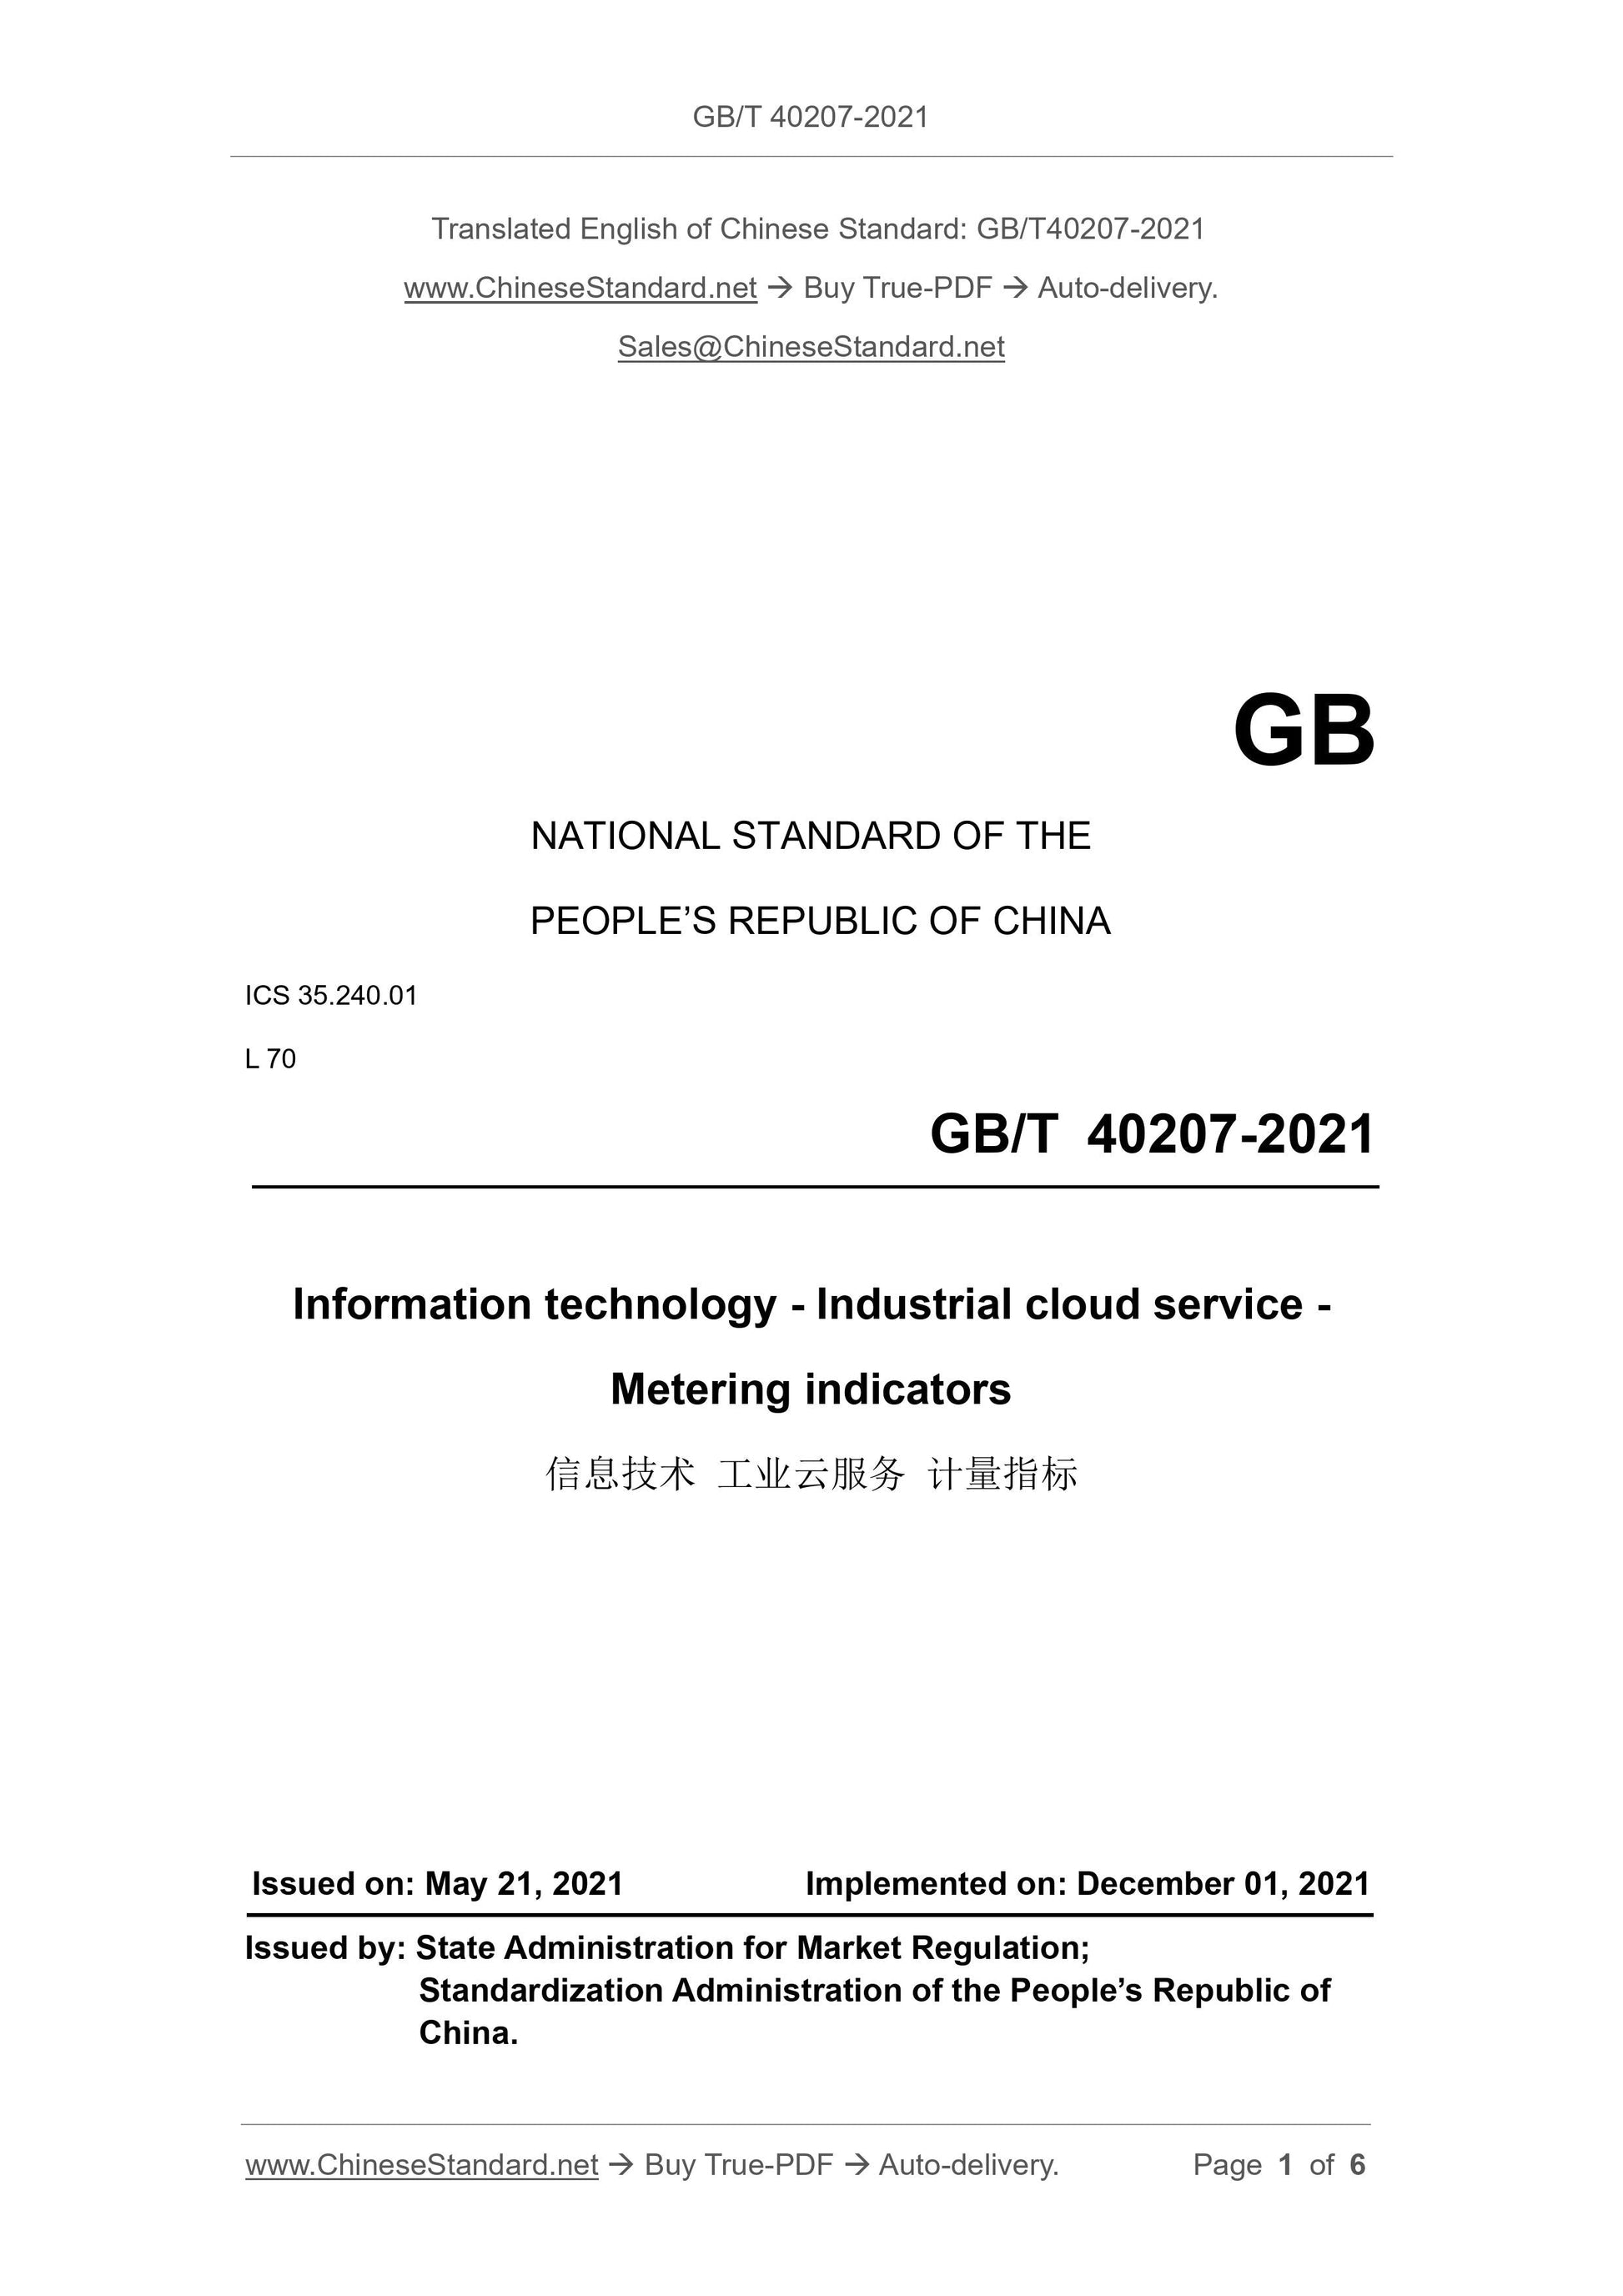 GB/T 40207-2021 Page 1